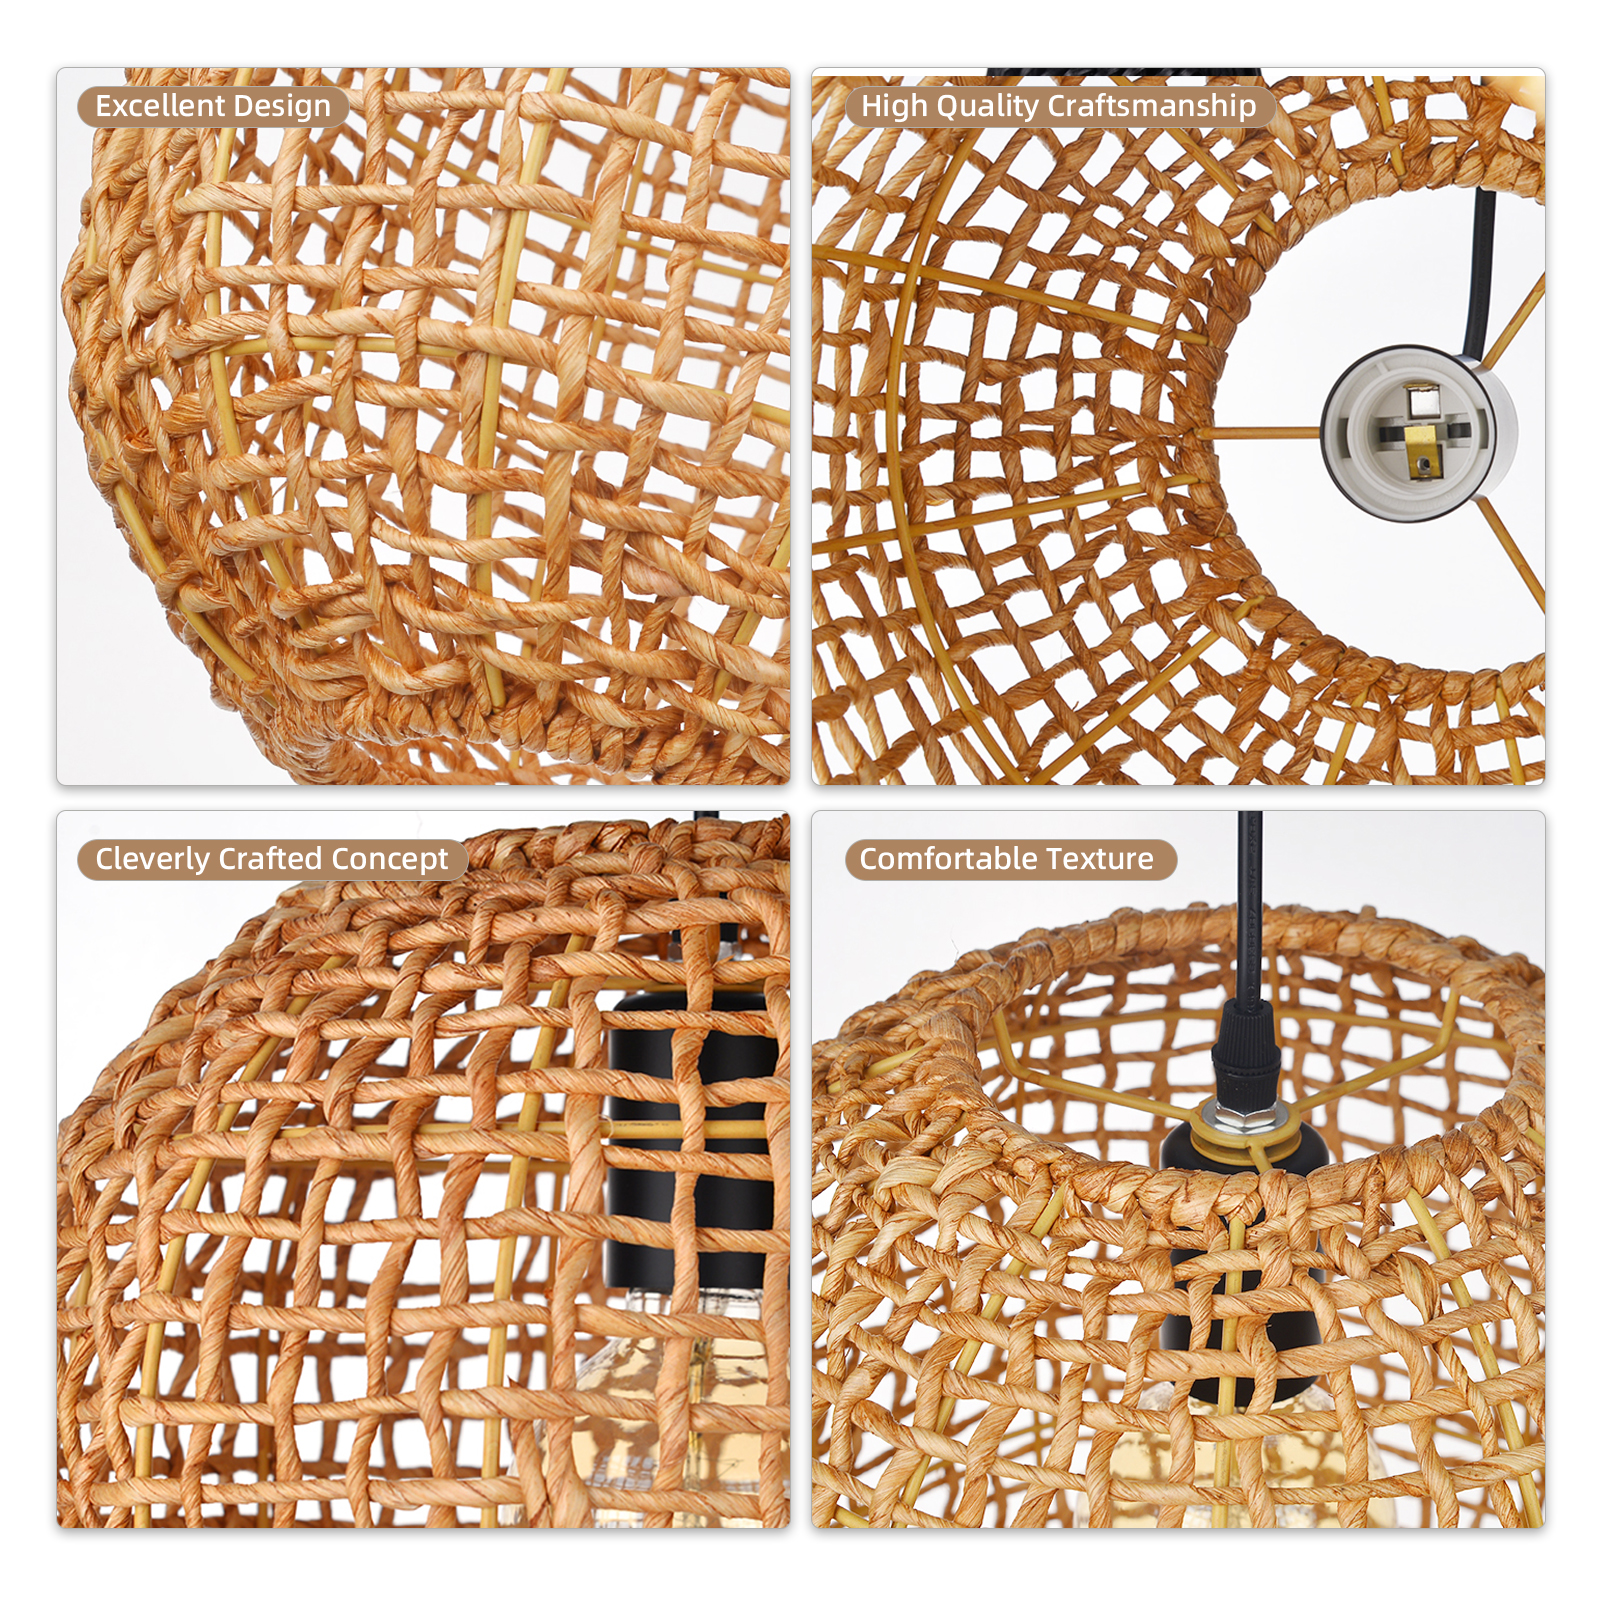 Coastal Style Natural Corn Straw Rope Netted Pendant light